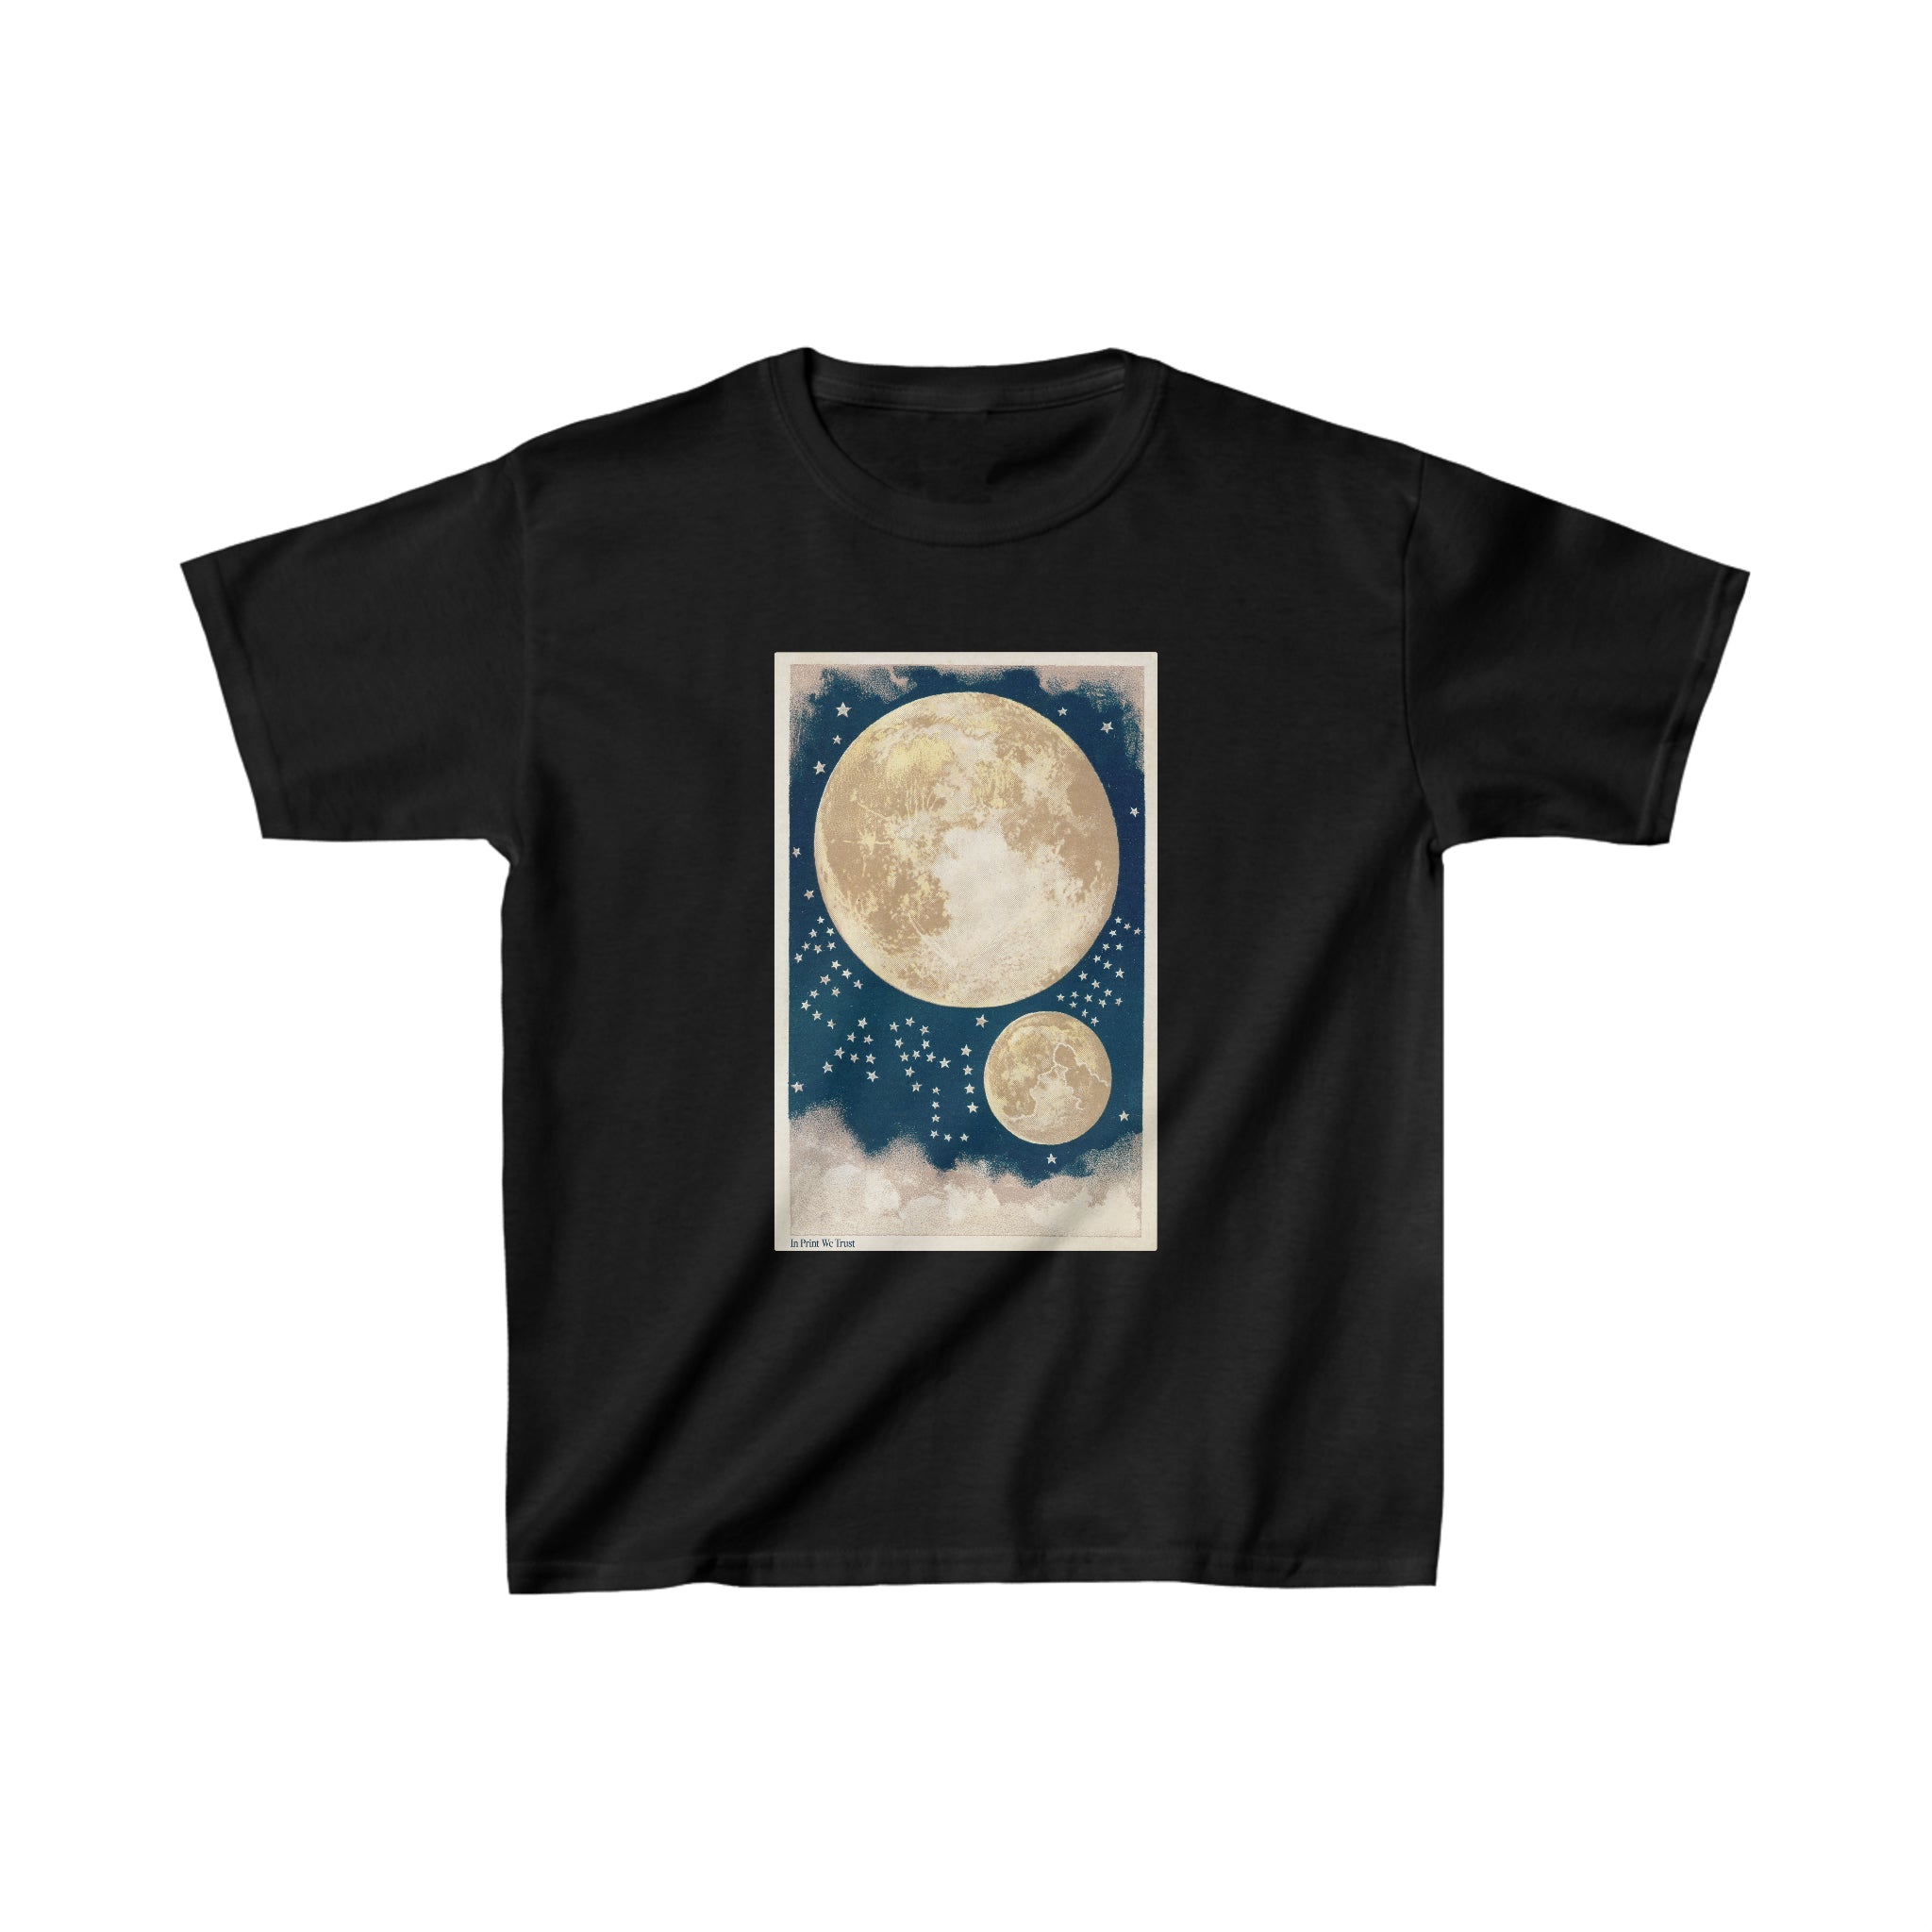 'To the moon and back' baby tee - In Print We Trust